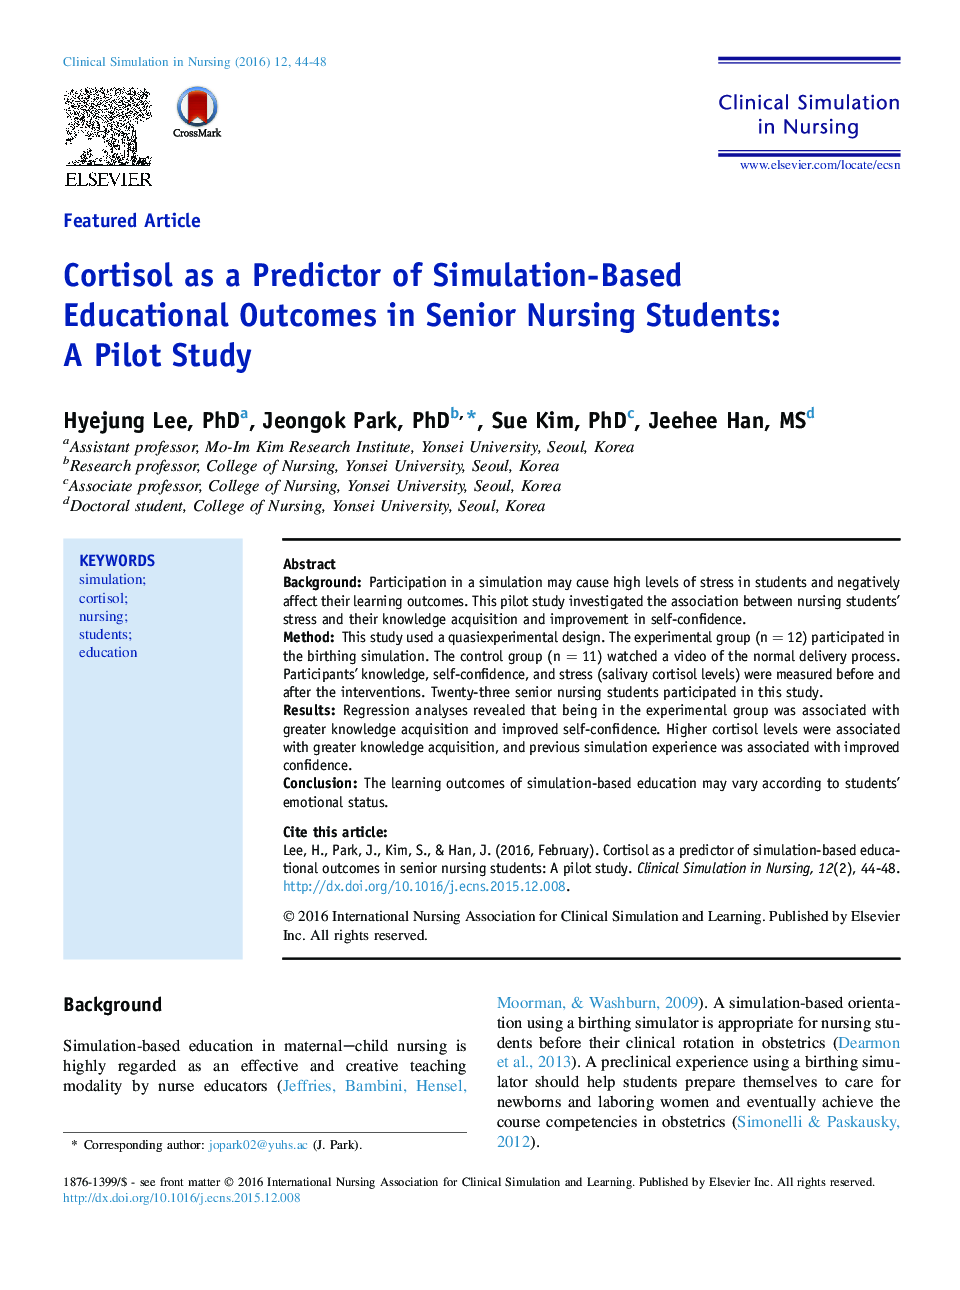 Cortisol as a Predictor of Simulation-Based Educational Outcomes in Senior Nursing Students: A Pilot Study